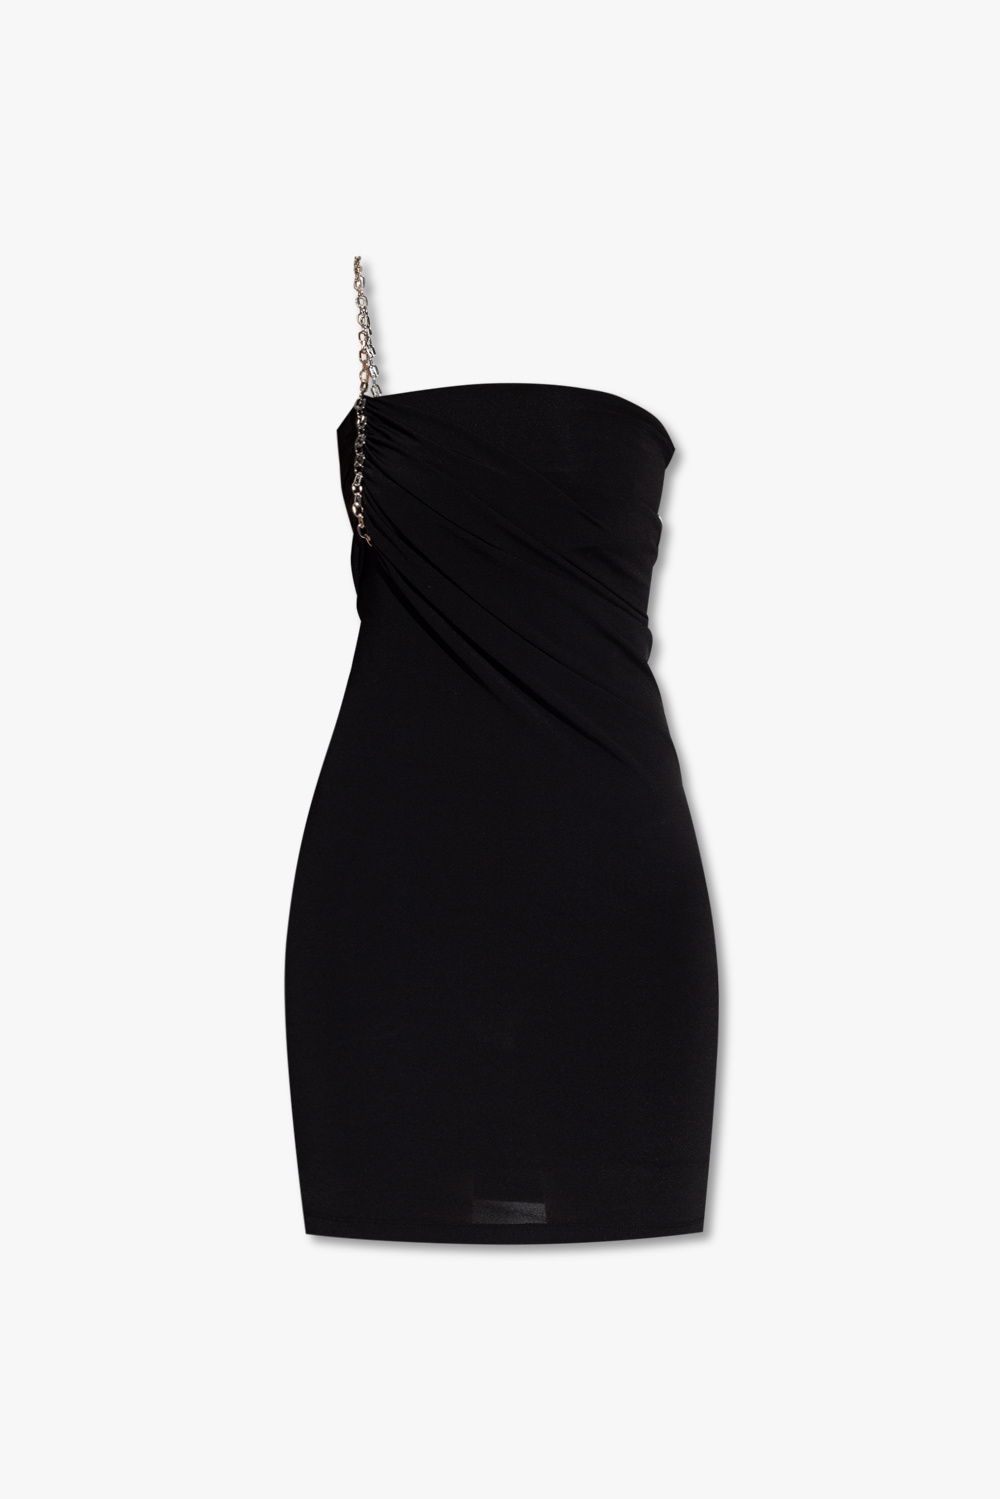 givenchy Special Dress with decorative strap